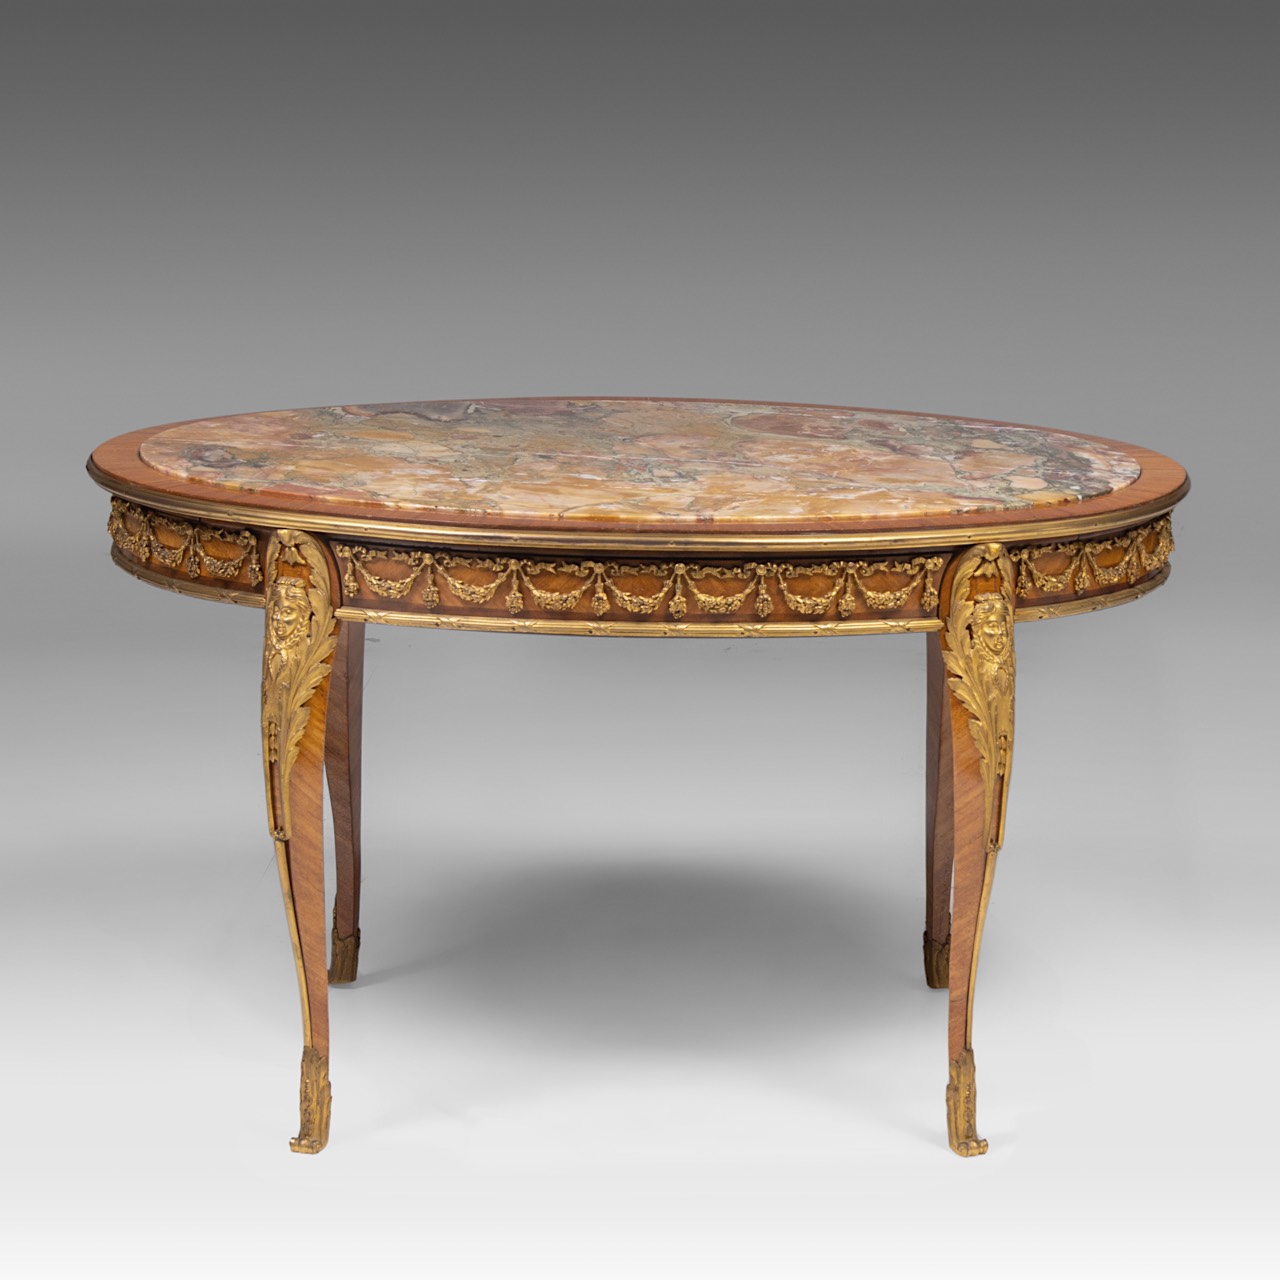 A mahogany marble-topped transitional-style side table with gilt bronze mounts, H 58 cm - W 100 cm - - Image 4 of 7